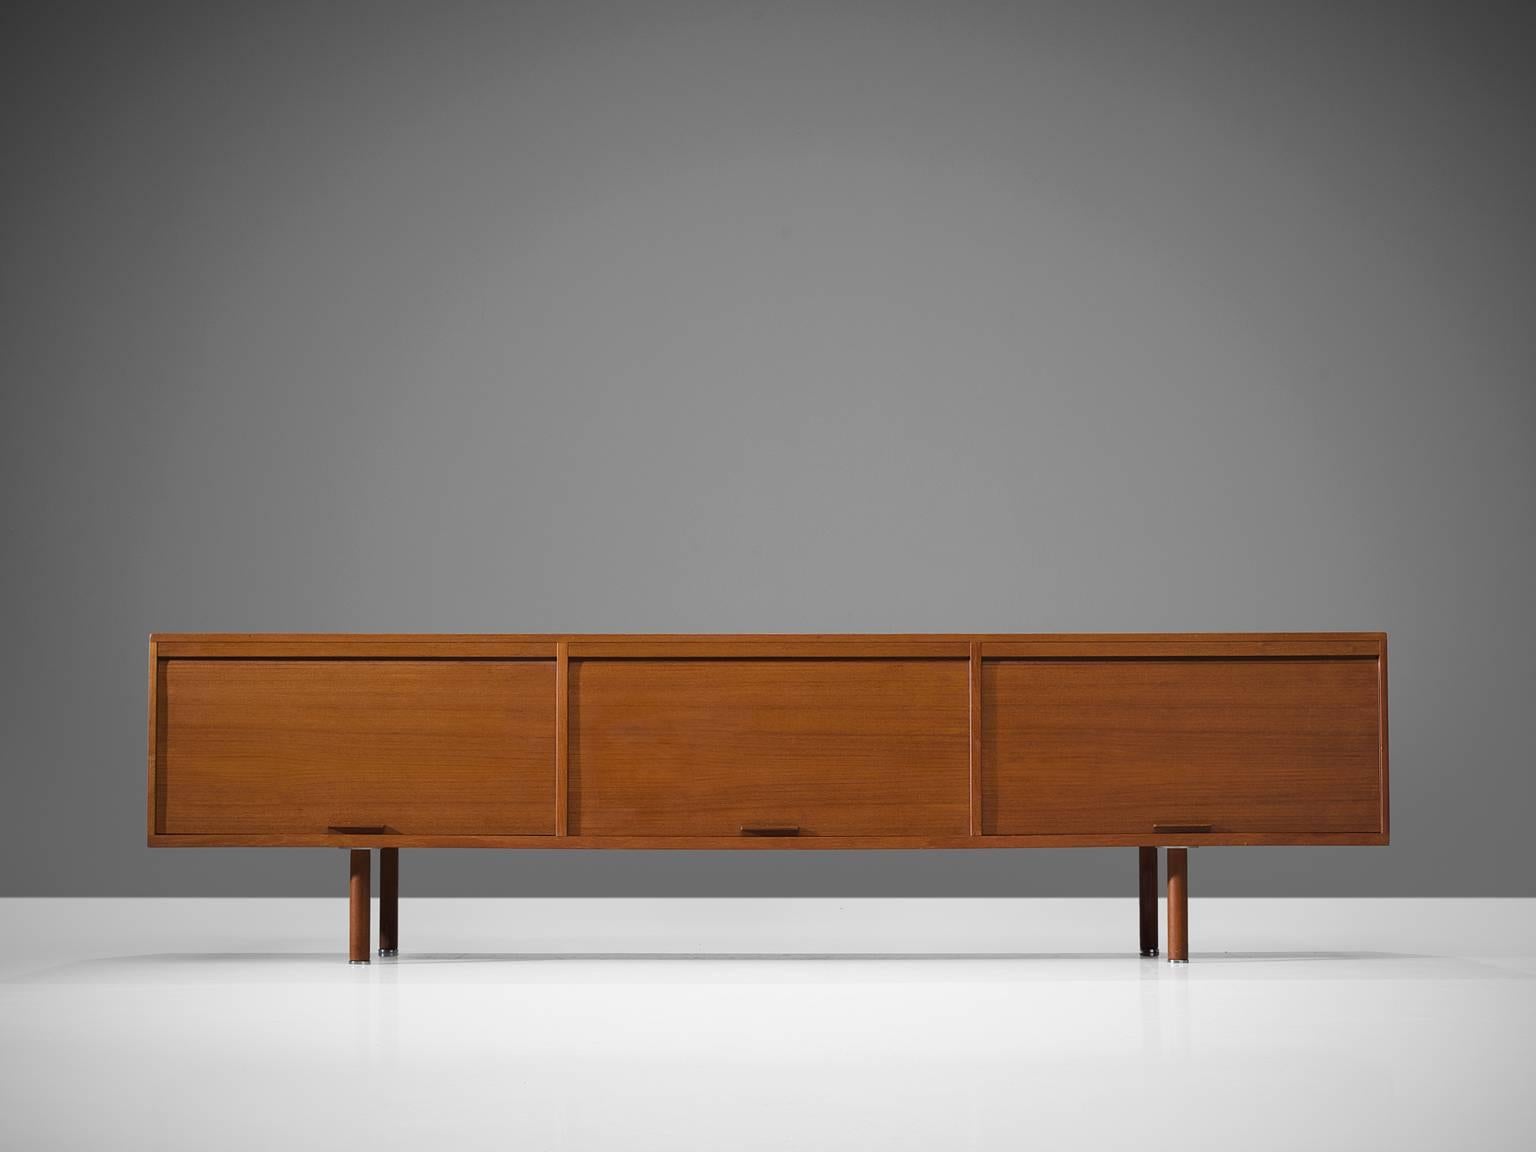 Kai Kristiansen, sideboard, white lacquer, chromed metal, Denmark, 1960s.

This relatively low sideboard is designed by Kai Kristiansen for Feldballes Møbelfabrik. The sideboard features three tambour doors and the interior features white lacquered